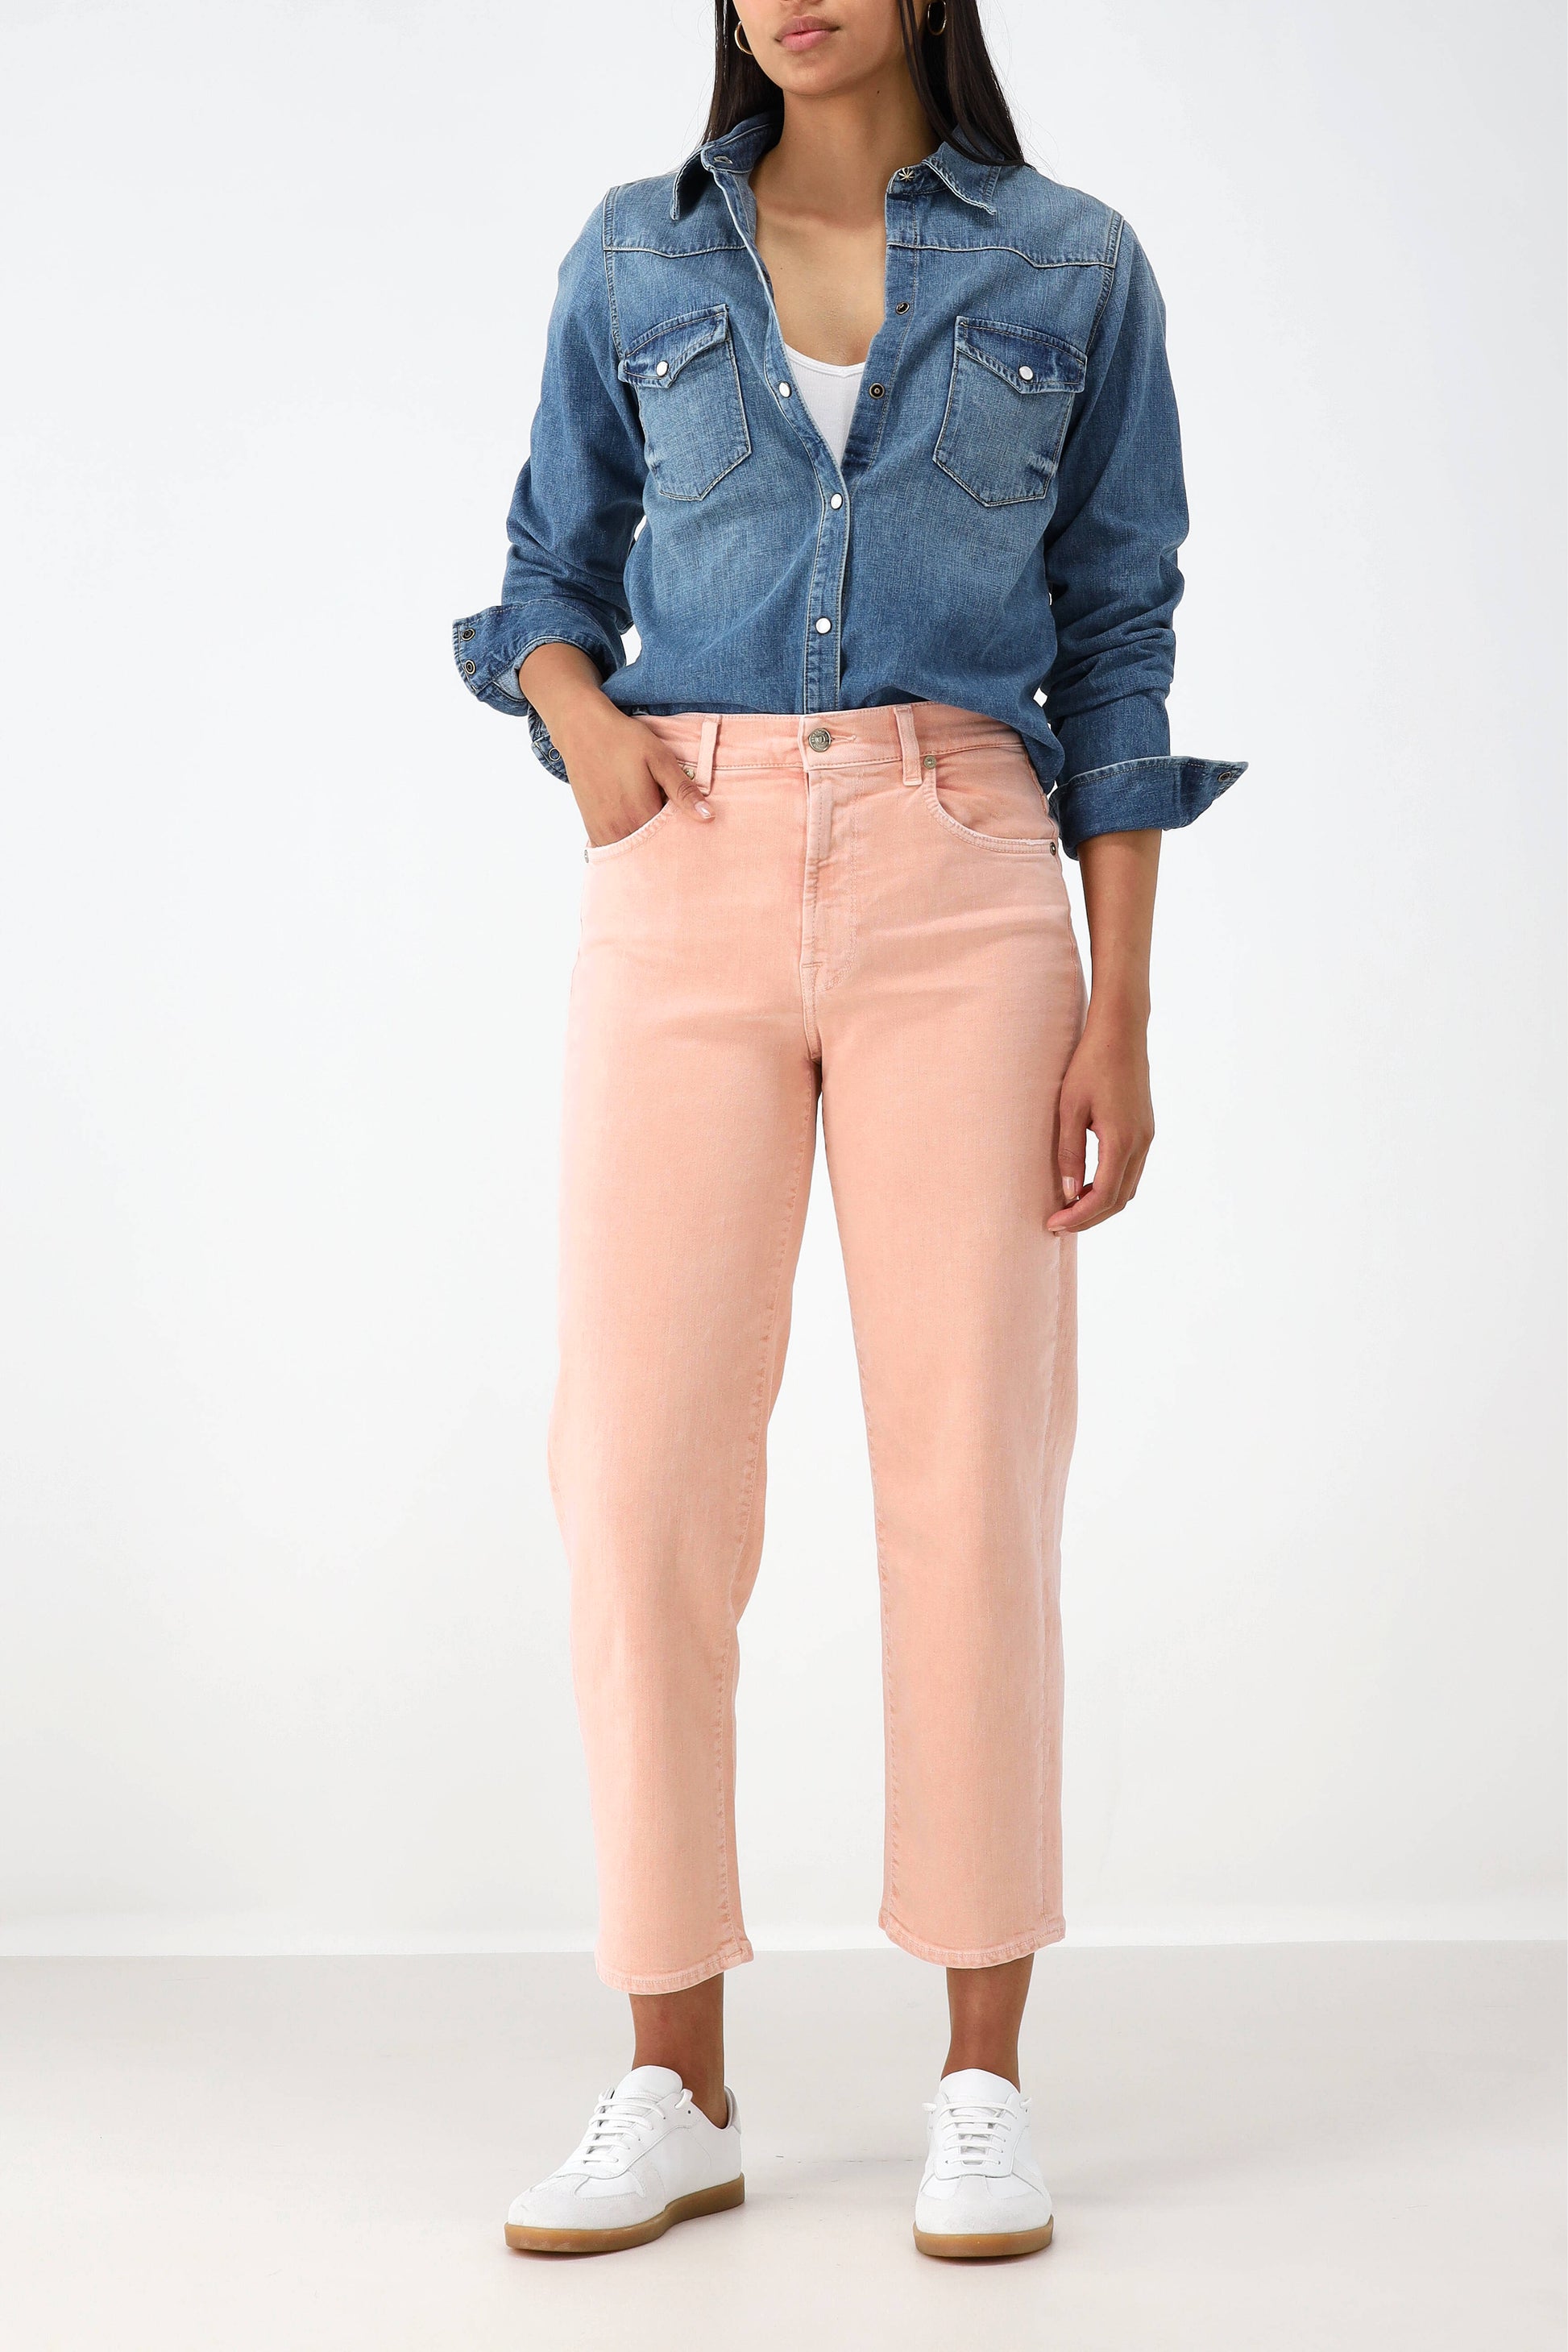 Jeans The Modern Straight in Orange7 For All Mankind - Anita Hass